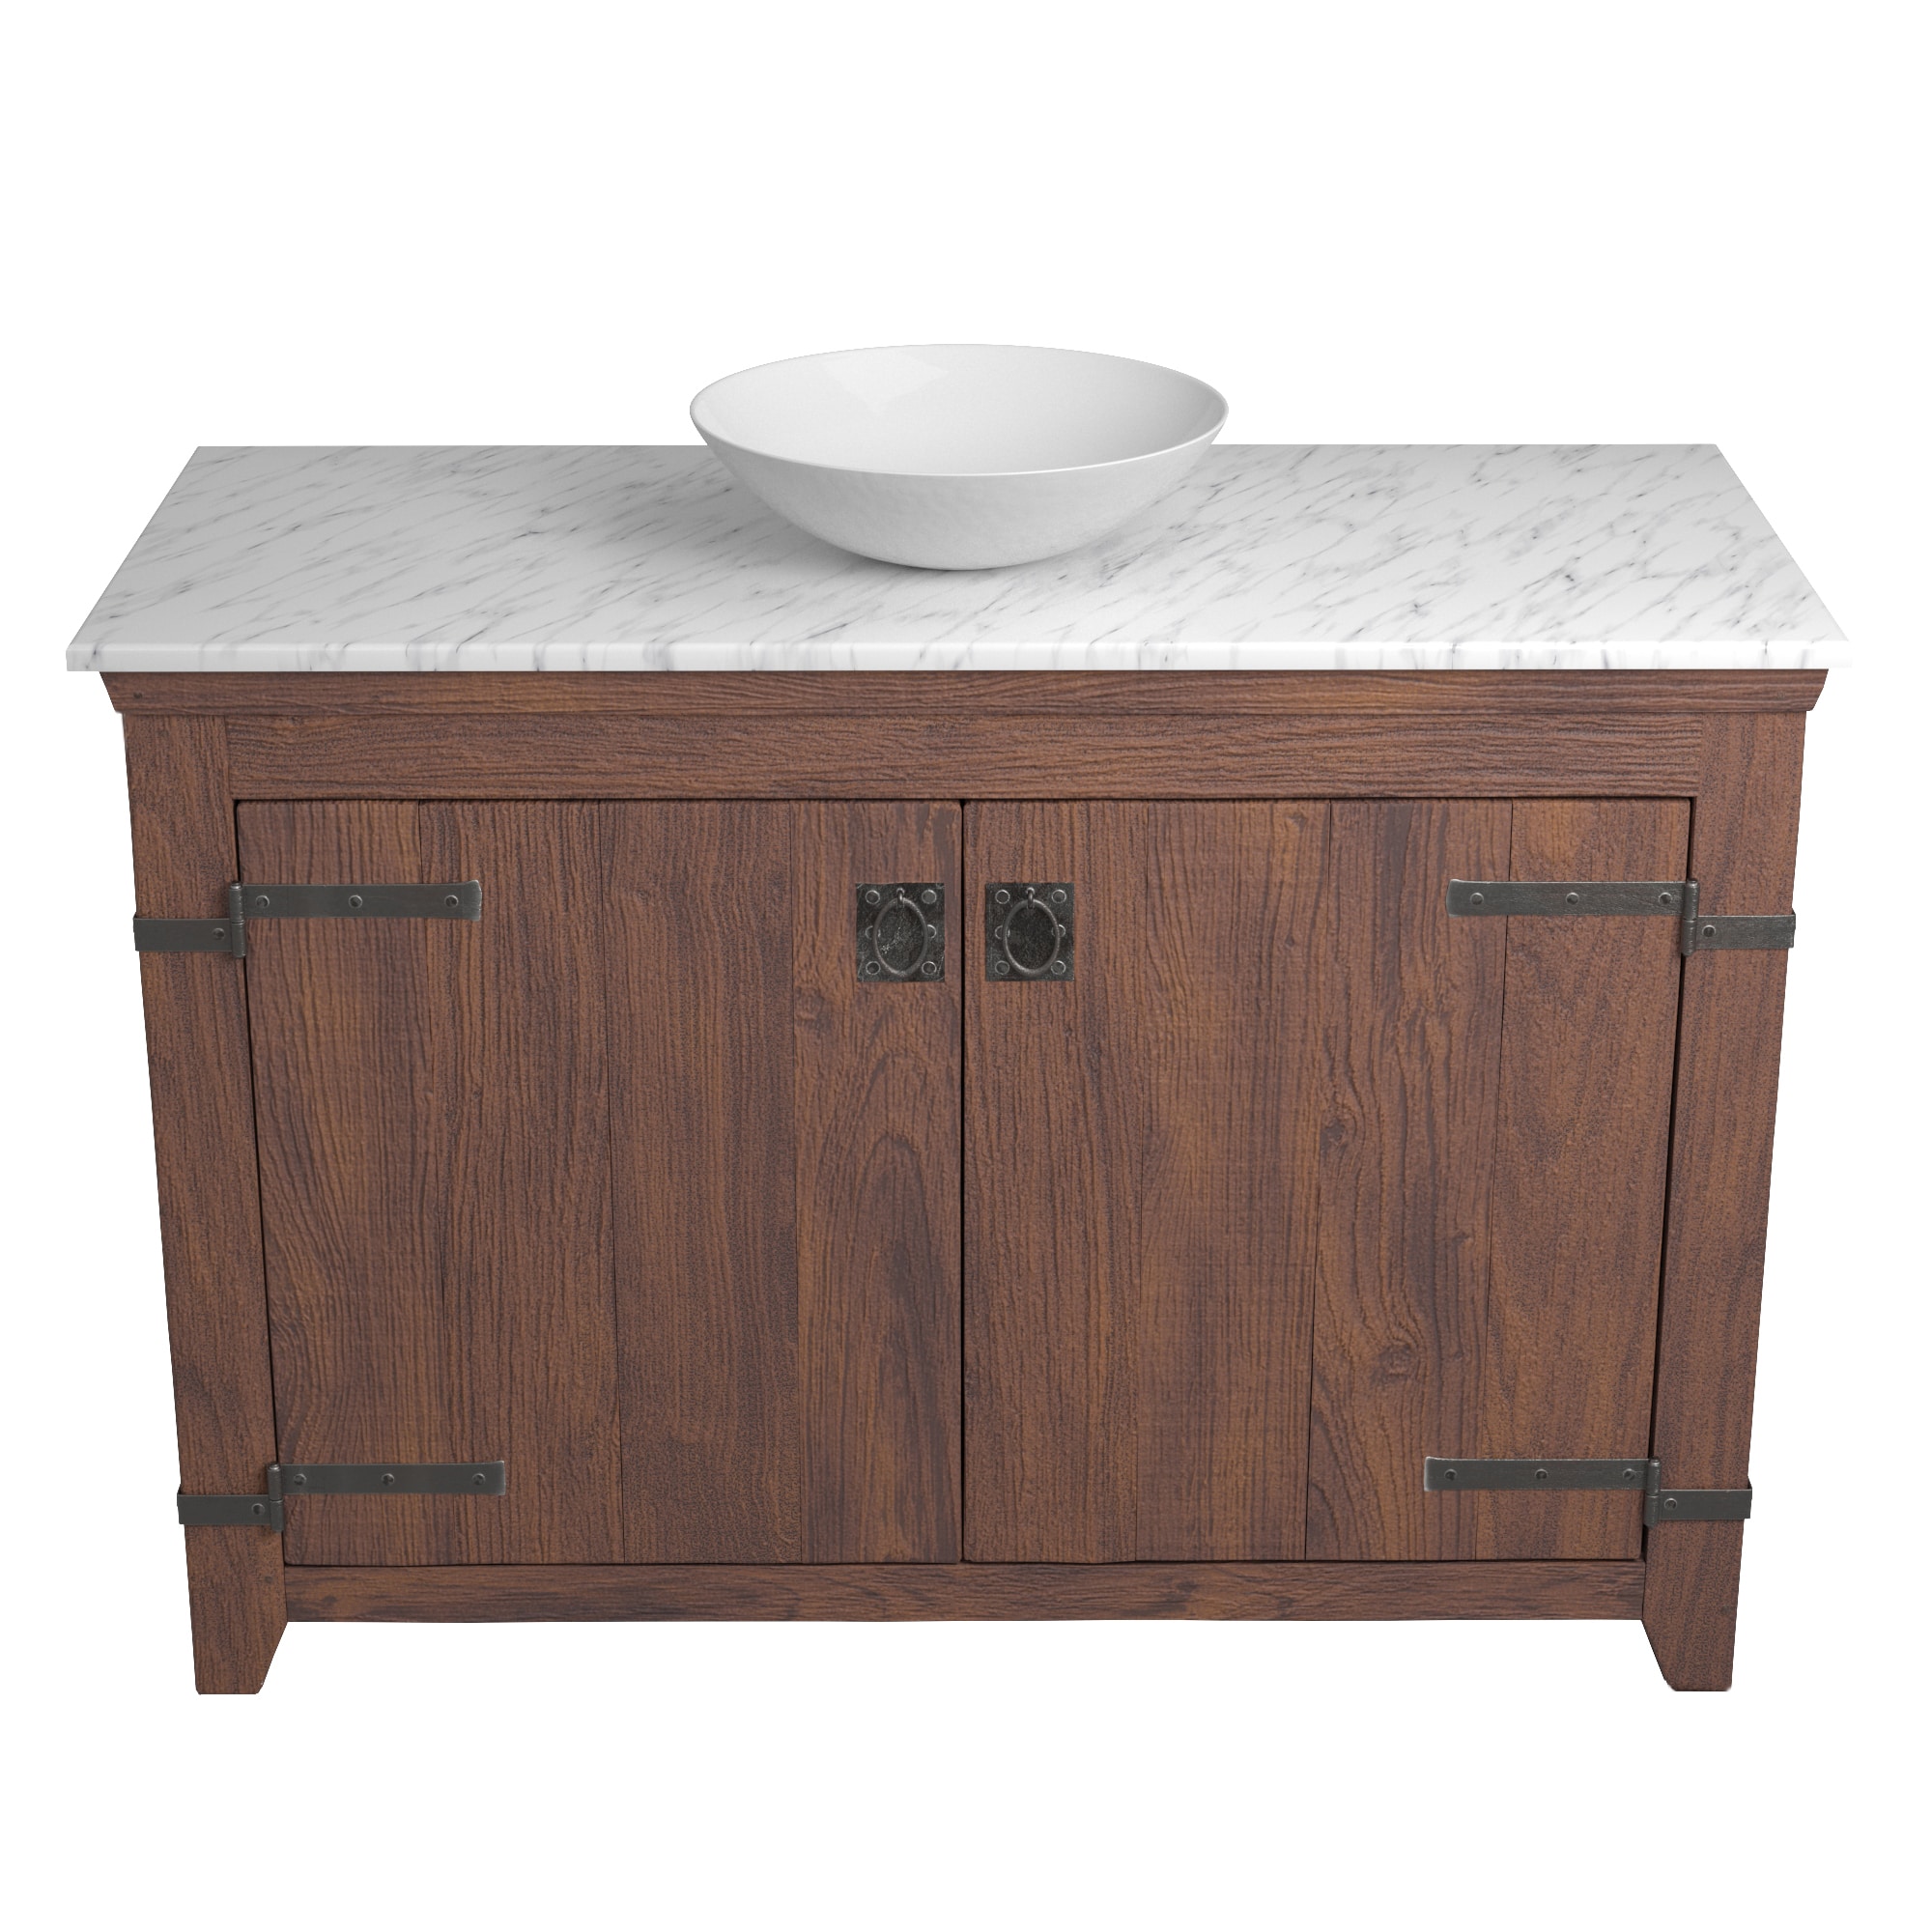 Native Trails 48" Americana Vanity in Chestnut with Carrara Marble Top and Verona in Bianco, Single Faucet Hole, BND48-VB-CT-MG-075